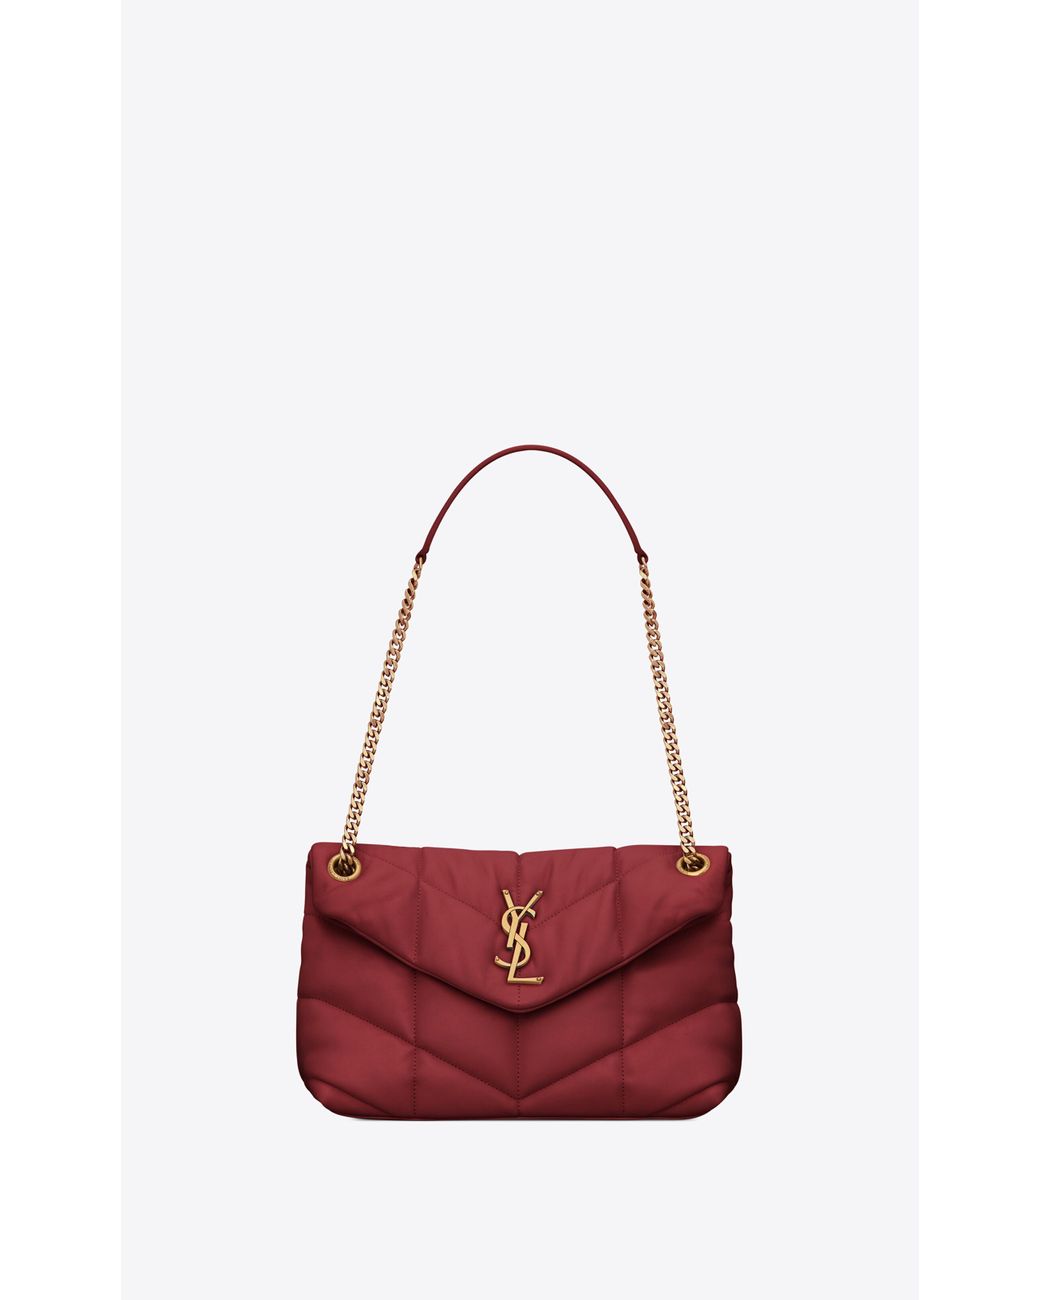 Saint Laurent Leather Puffer Small Bag In Quilted Lambskin in Red - Lyst